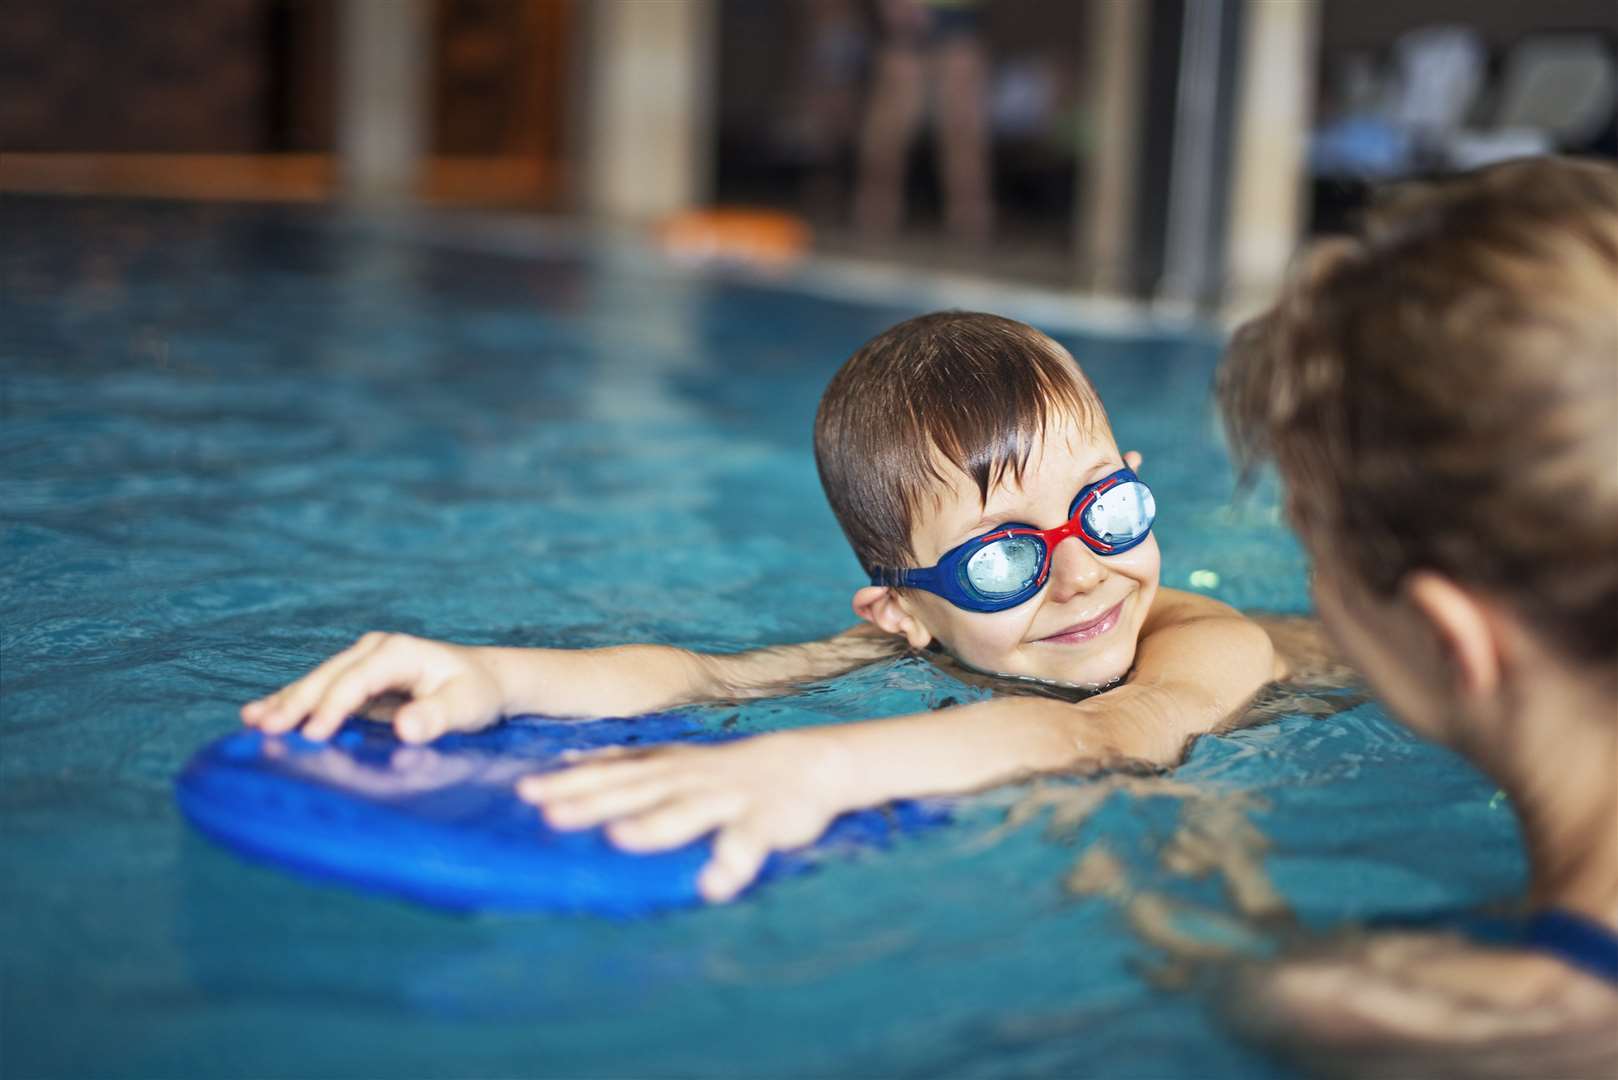 Parents and schools are being encouraged to focus on making sure children can swim this summer